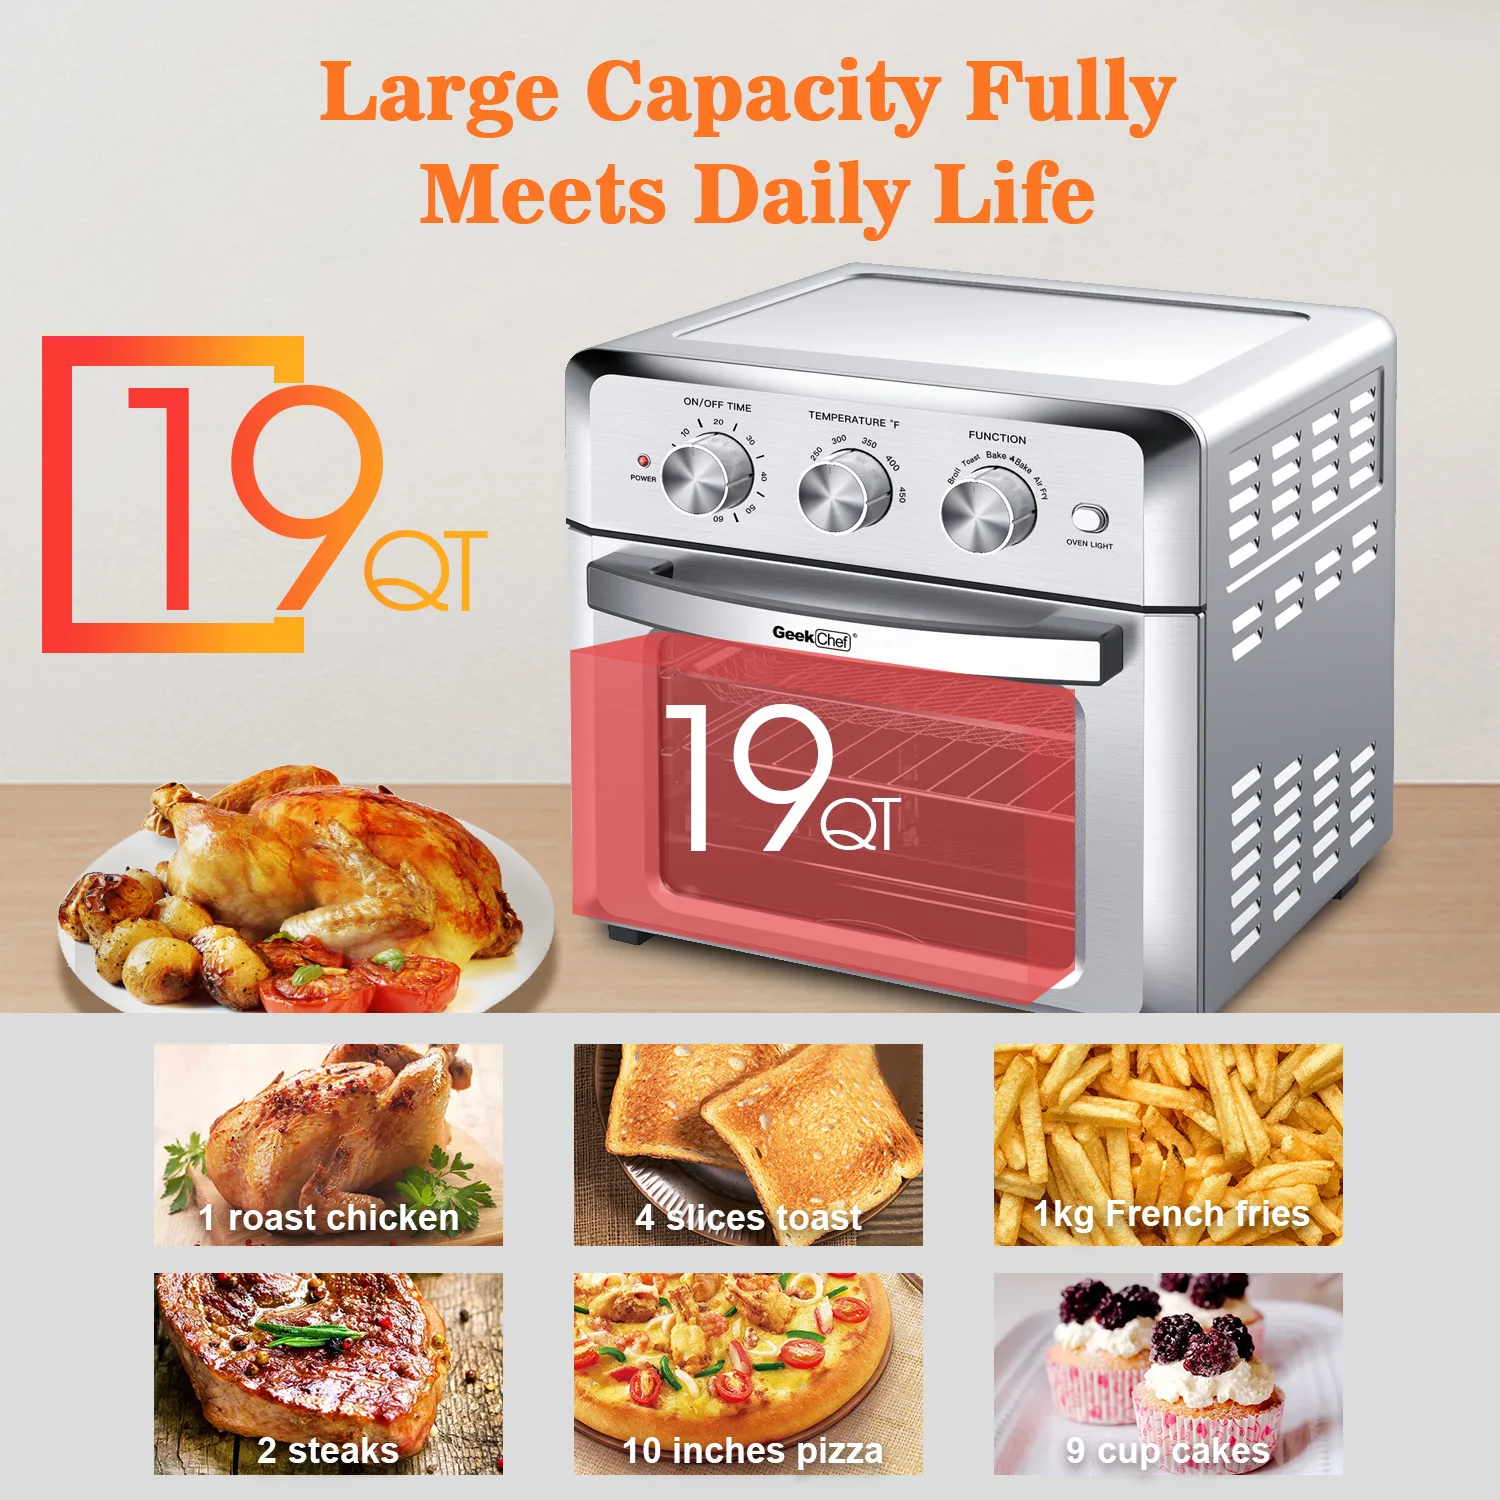 Air Fryer Oven, 19QT Convection Airfryer Countertop Oven, Fry Oil-Free, Cooking 4 Accessories Included, Stainless Steel,1500W